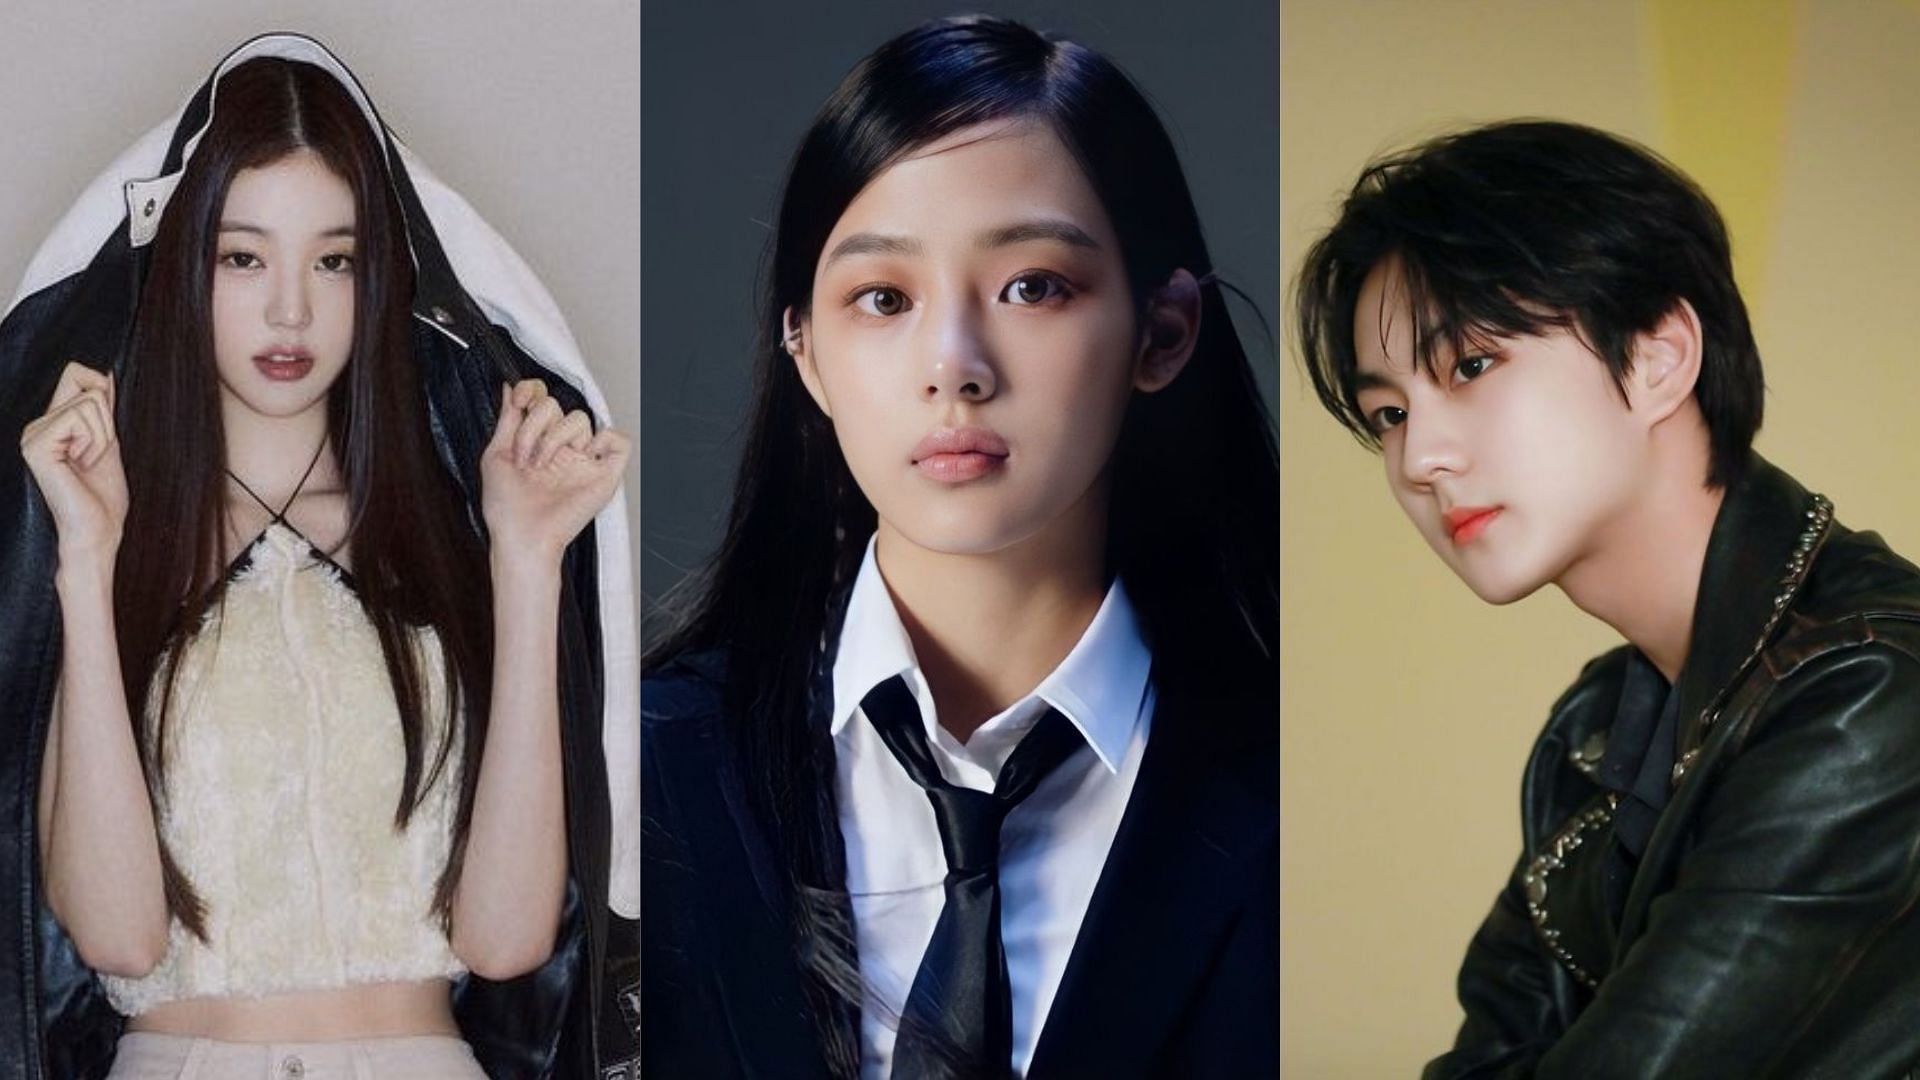 6 Female Korean Celebrities Who Look Gorgeous With The Latest 'Miu